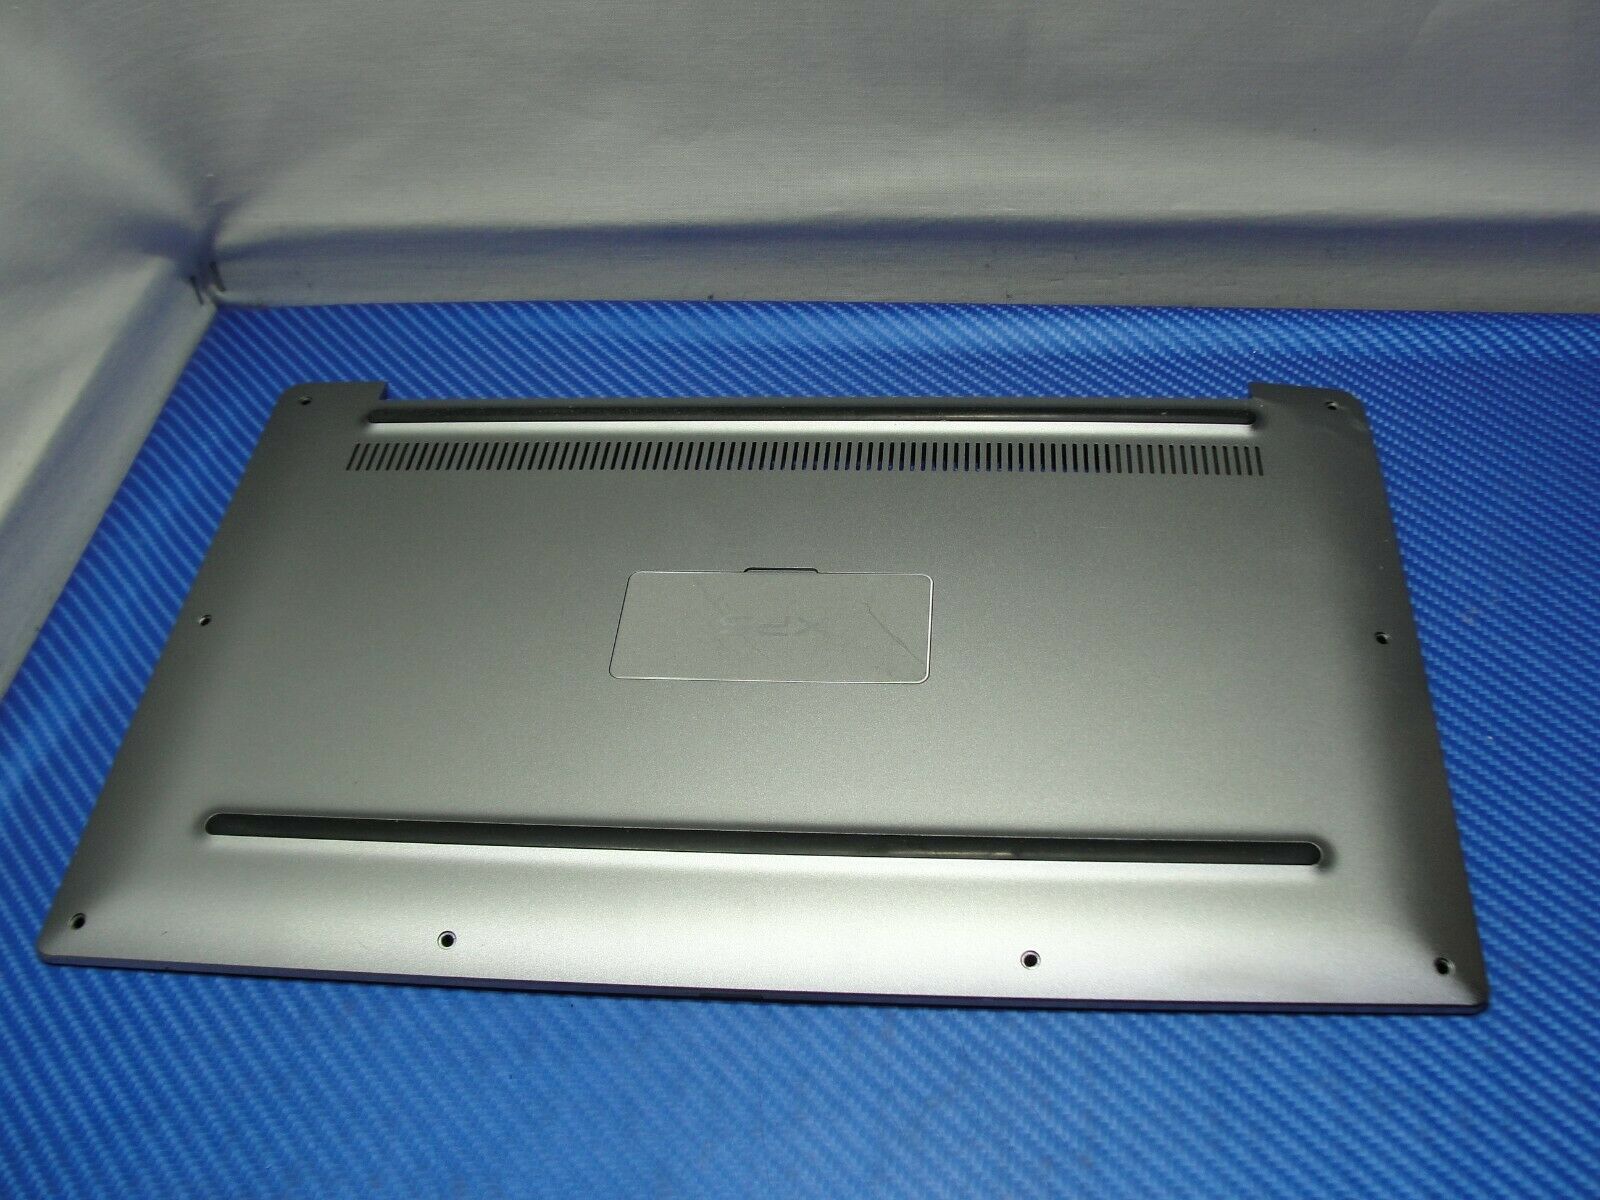 Dell XPS 13 9350 13.3